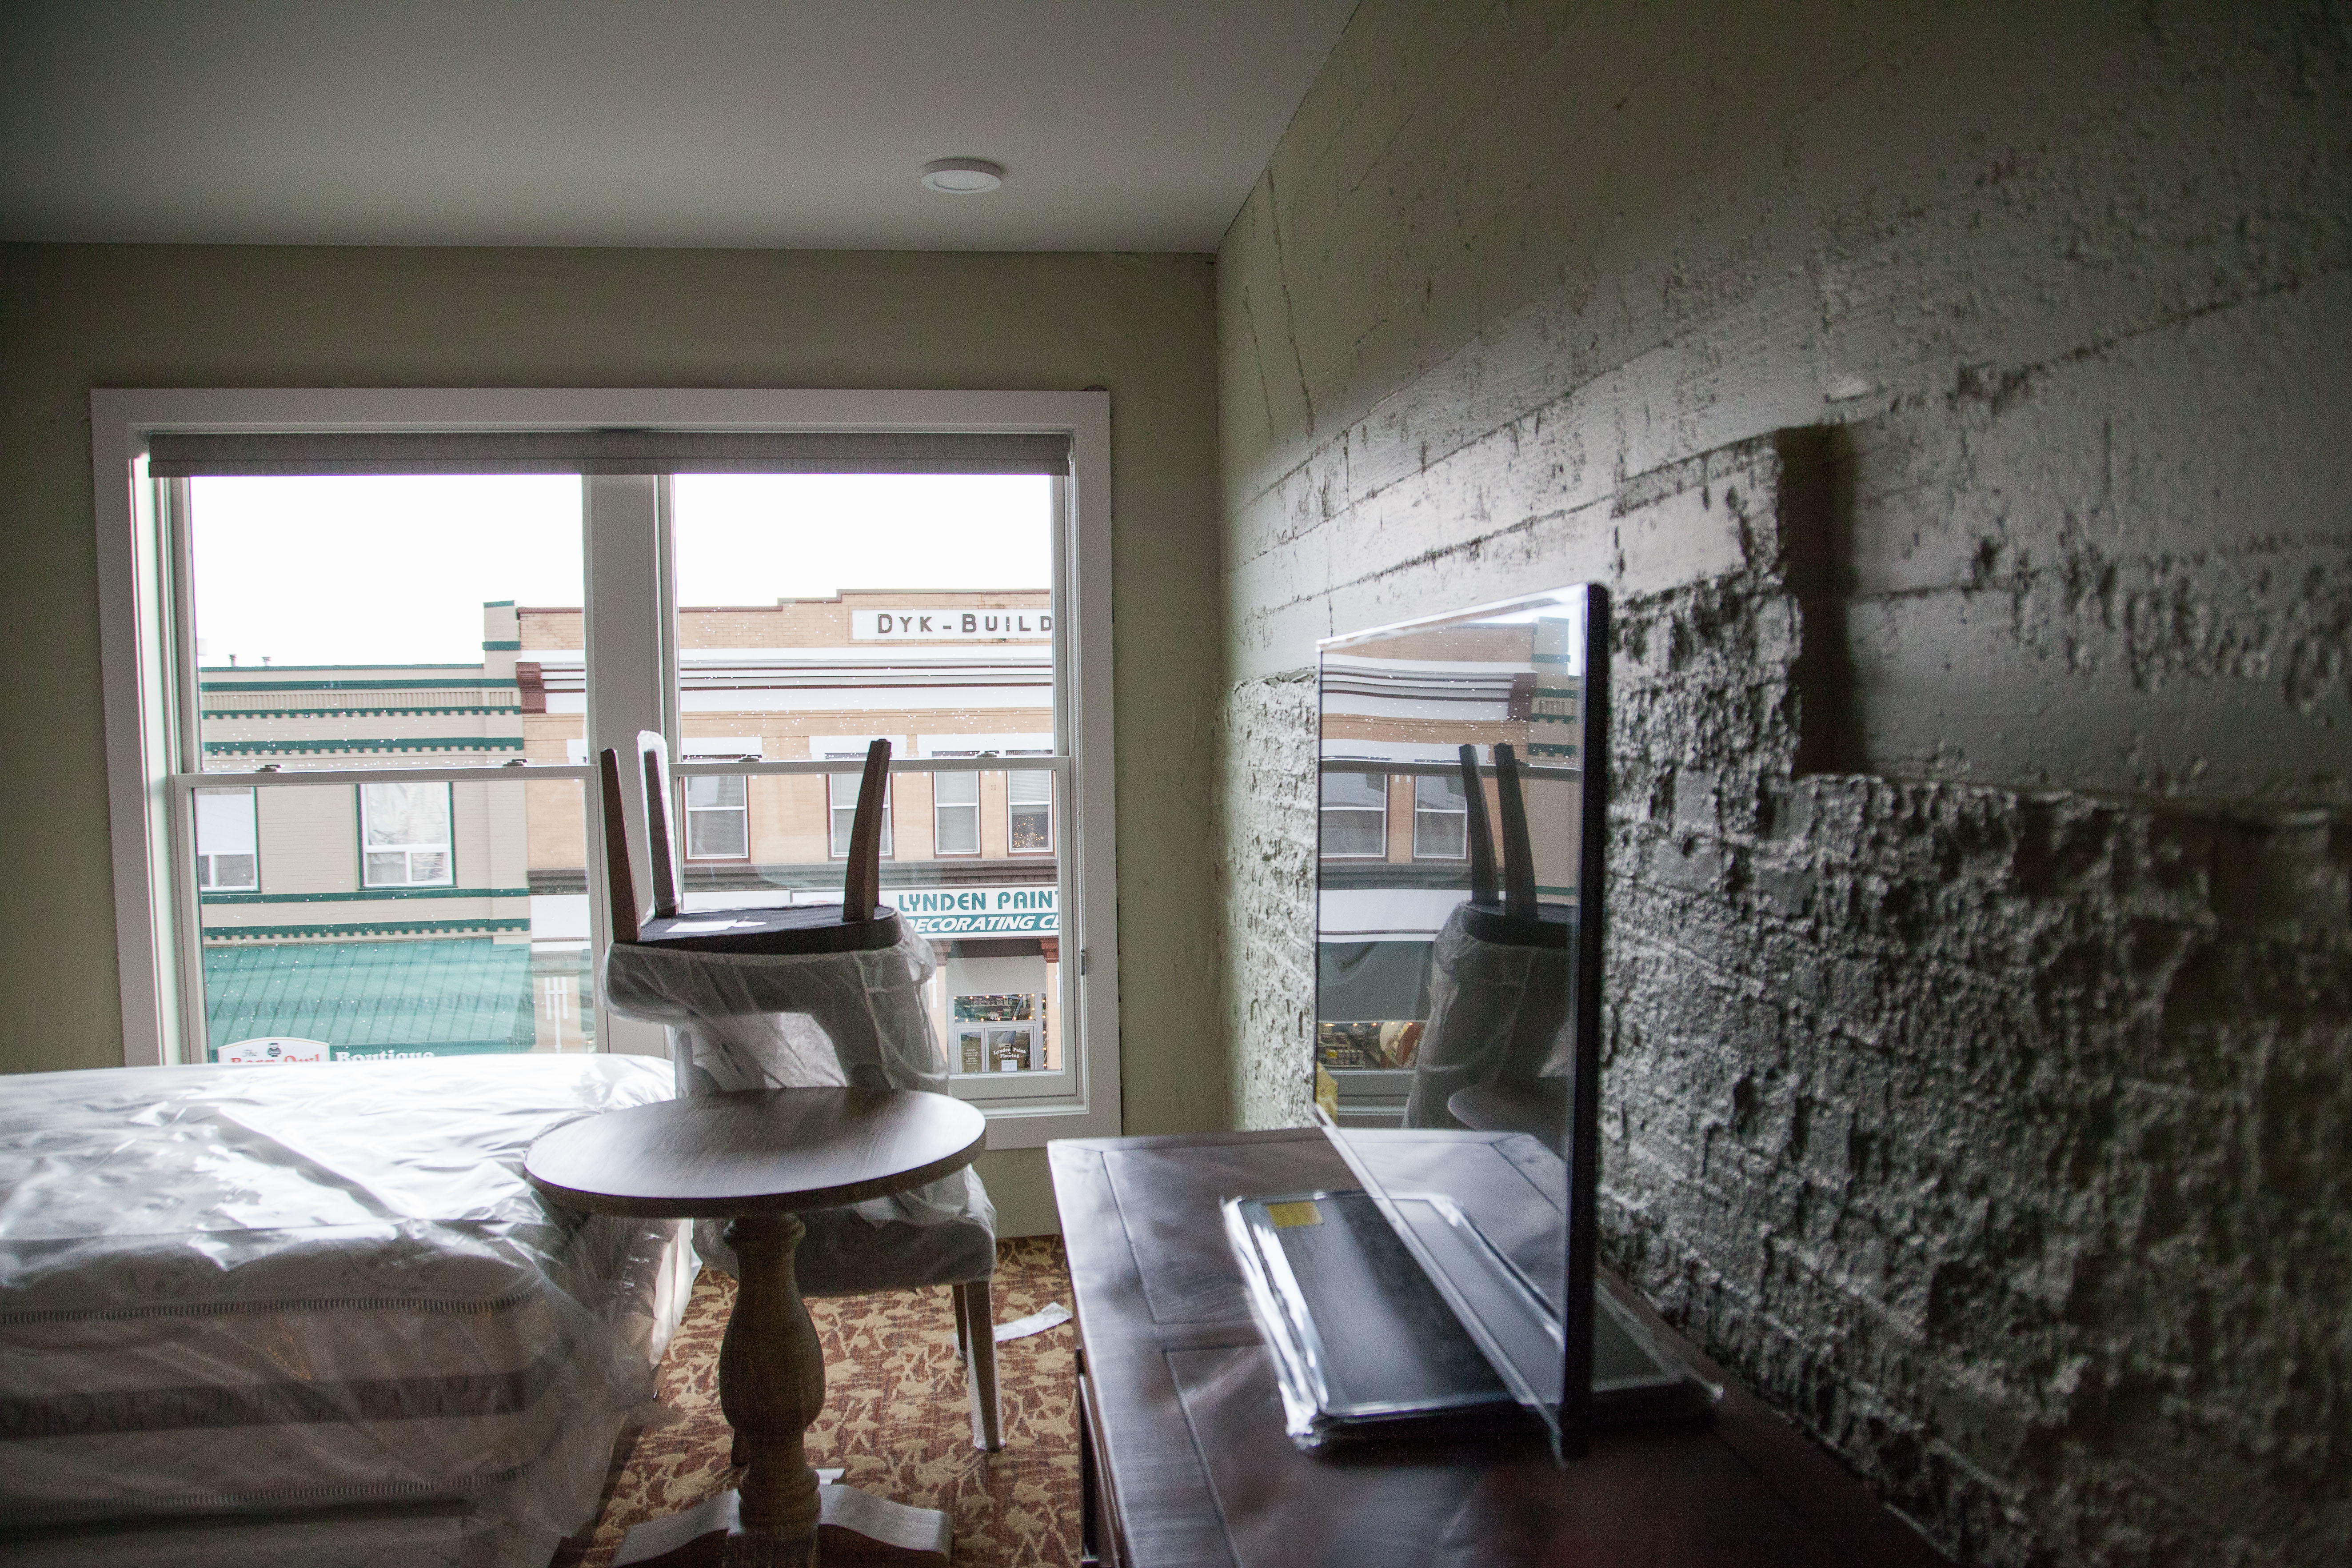 Another Town Room overlooking Front Street, with historic exposed brick behind a modern LG flat TV, and still-wrapped furniture.